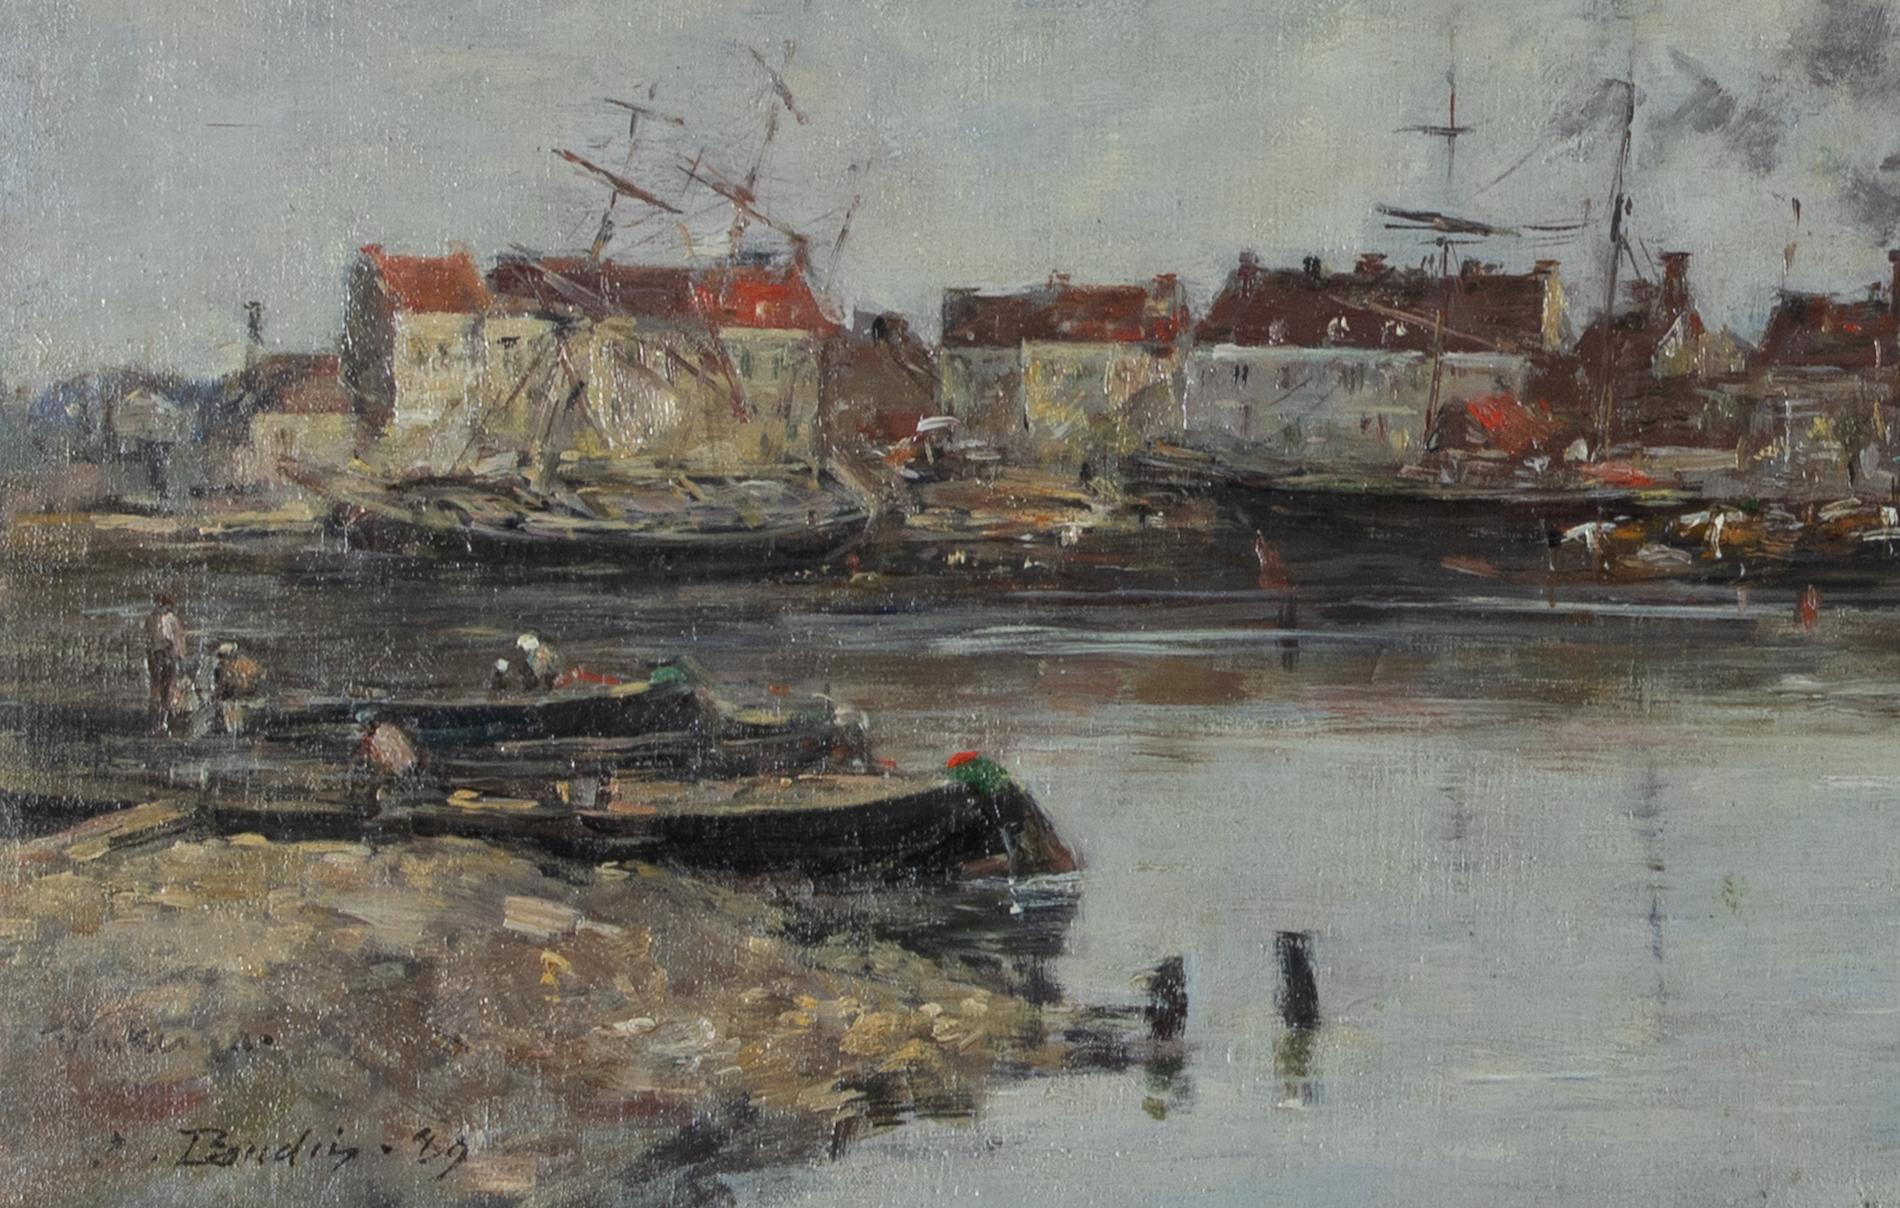 *PLEASE NOTE UK BUYERS WILL ONLY PAY 5% VAT ON THIS PURCHASE.

Dunkerque, le vieux bassin by Eugène Boudin (1824-1898)
Oil on canvas
46 x 65.2 cm (18 ¹/₈ x 25 ⁵/₈ inches)
Signed and dated and inscribed lower left, Dunkerque. E. Boudin.